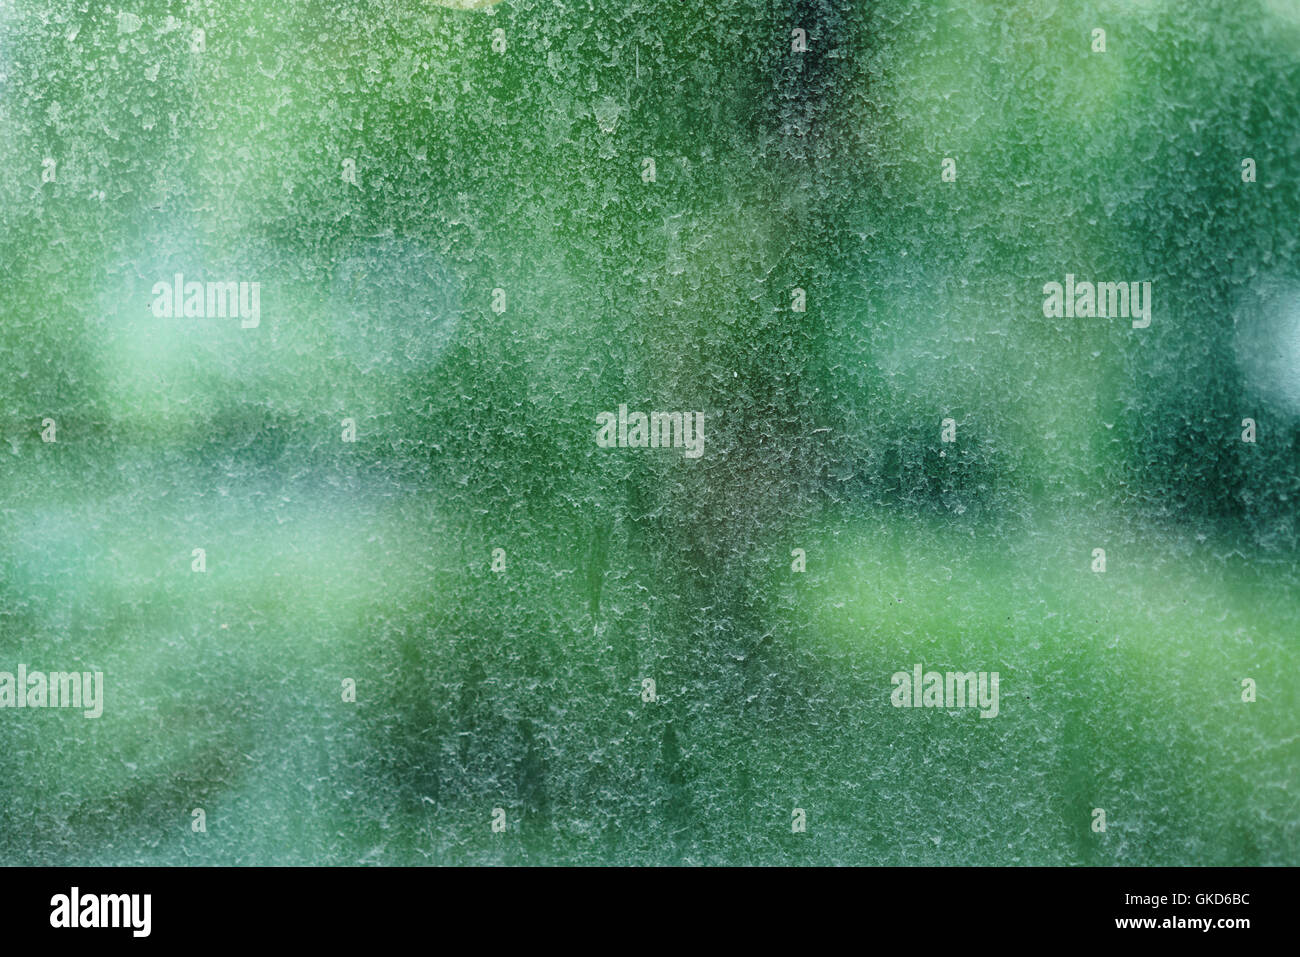 dirty glass texture with green background Stock Photo